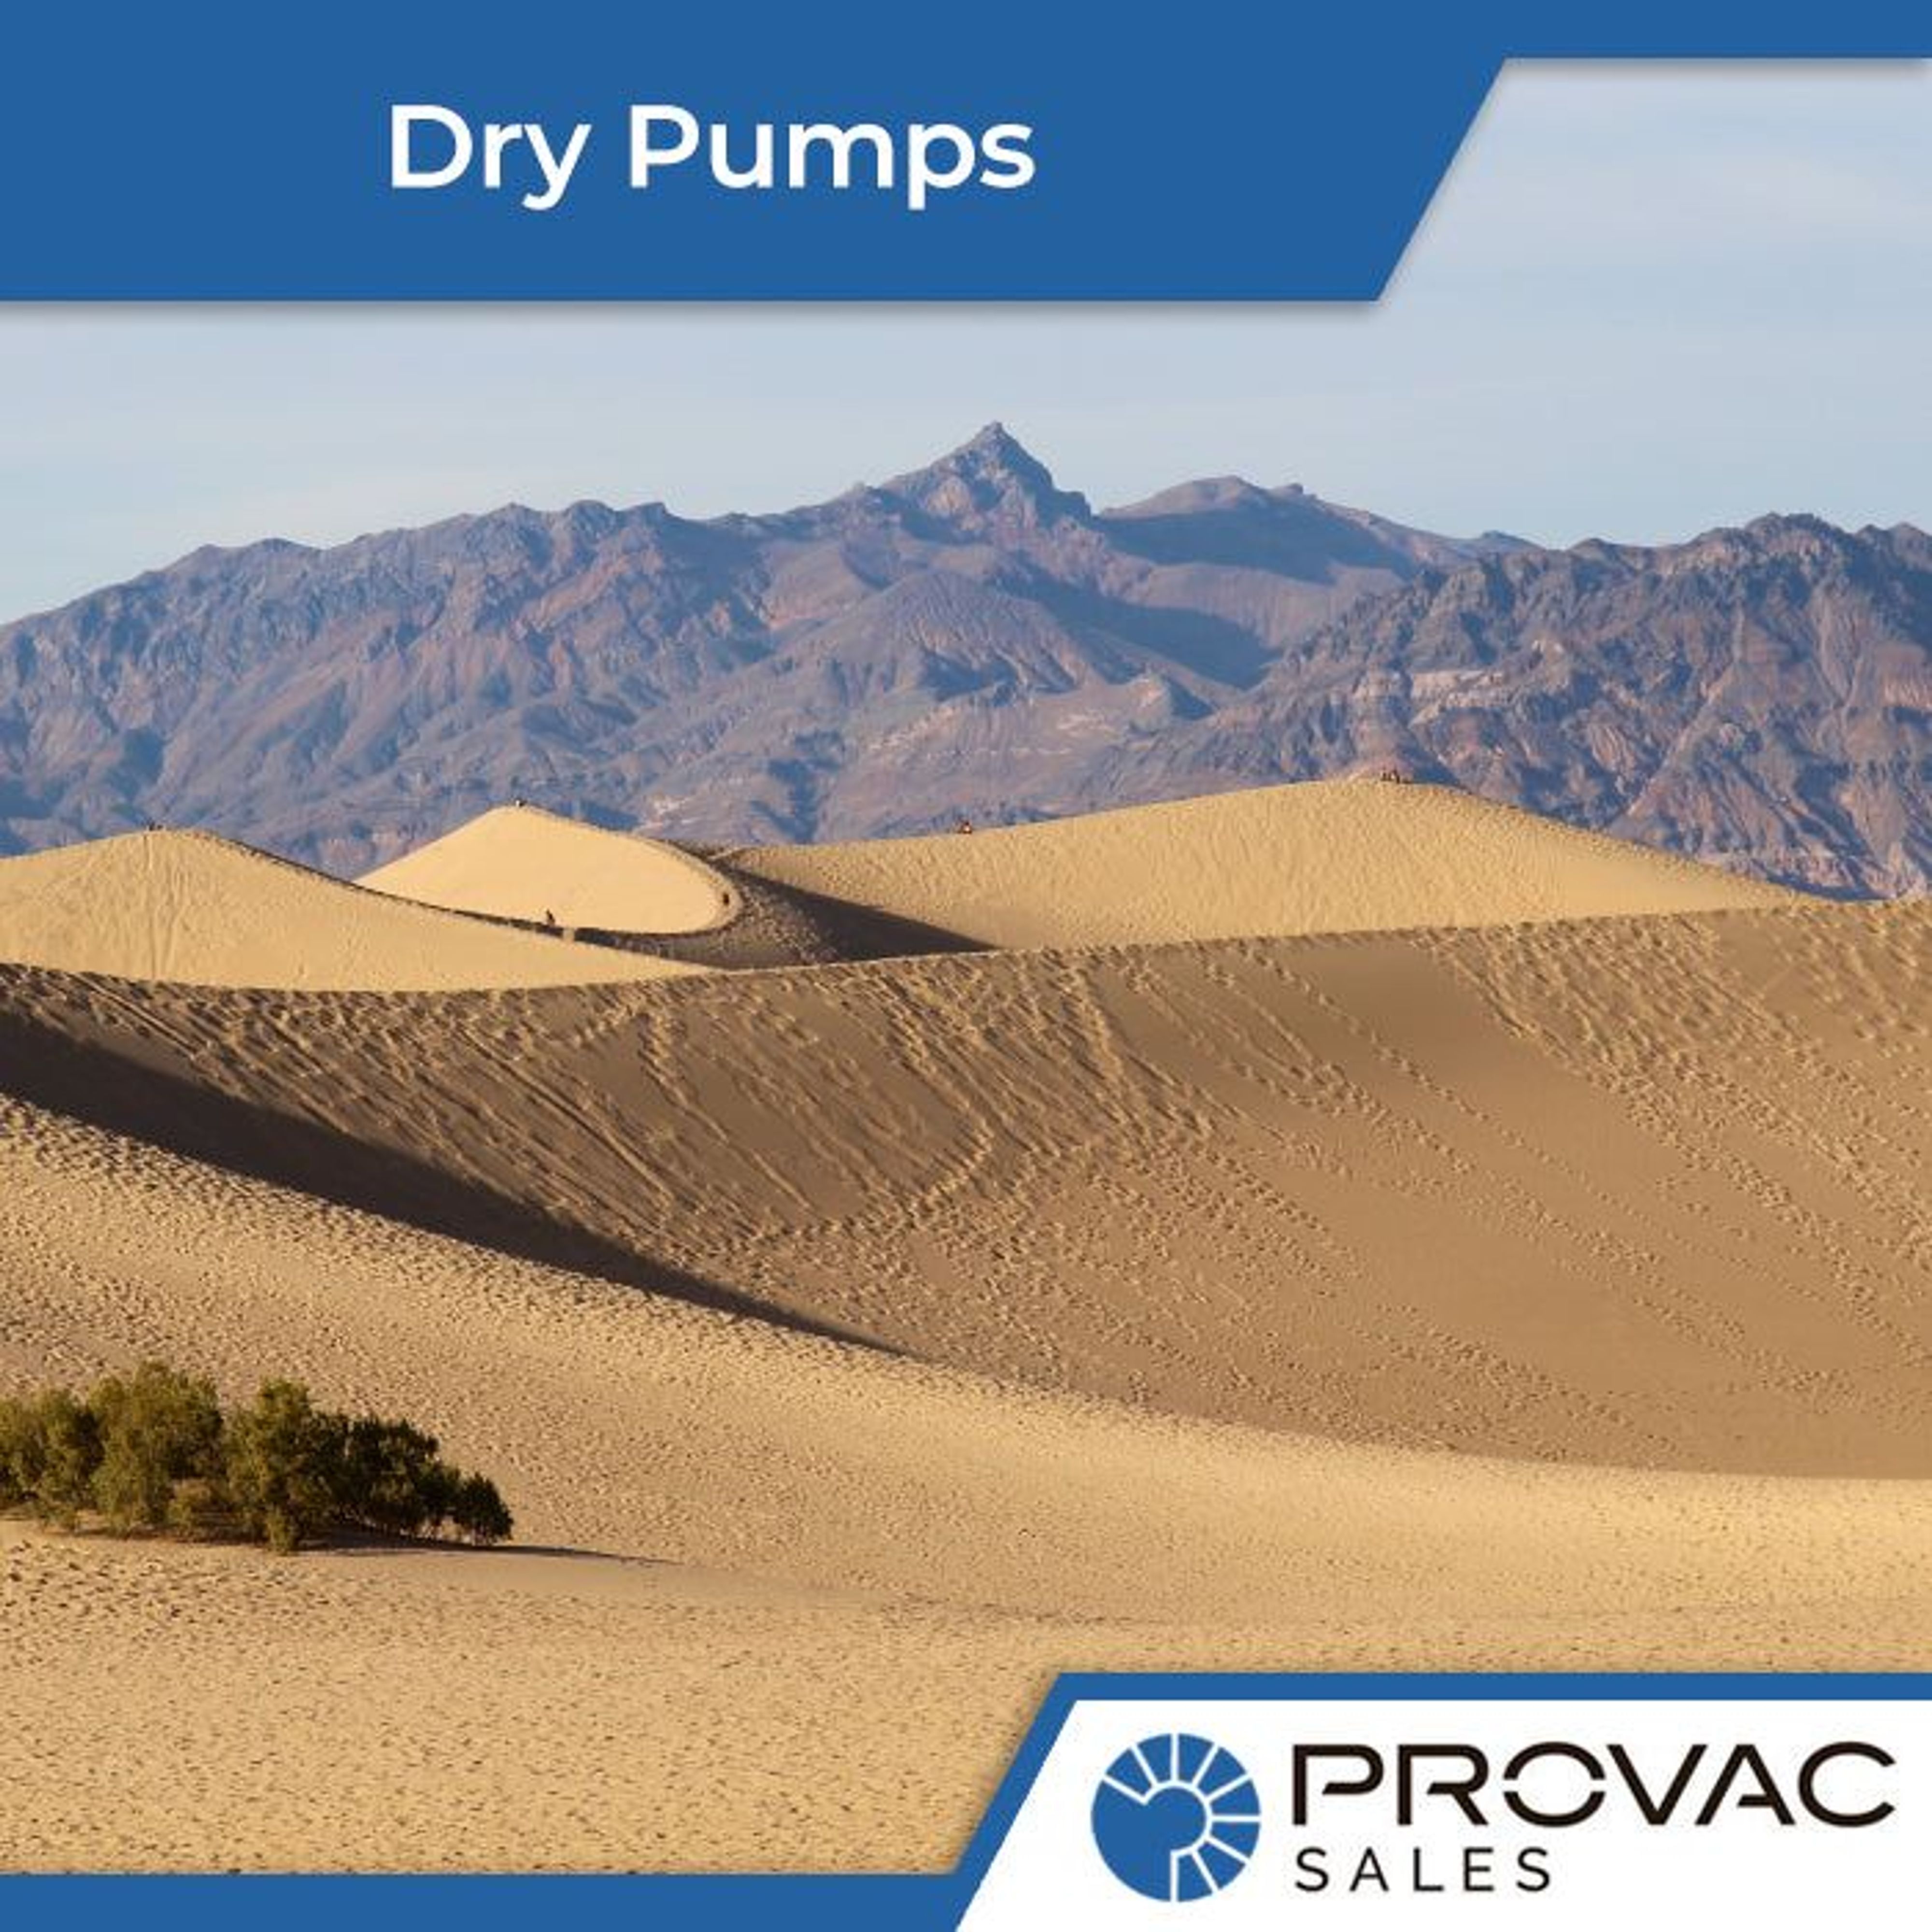 Dry Pumps: Screw, Roots, Hook & Claw Background